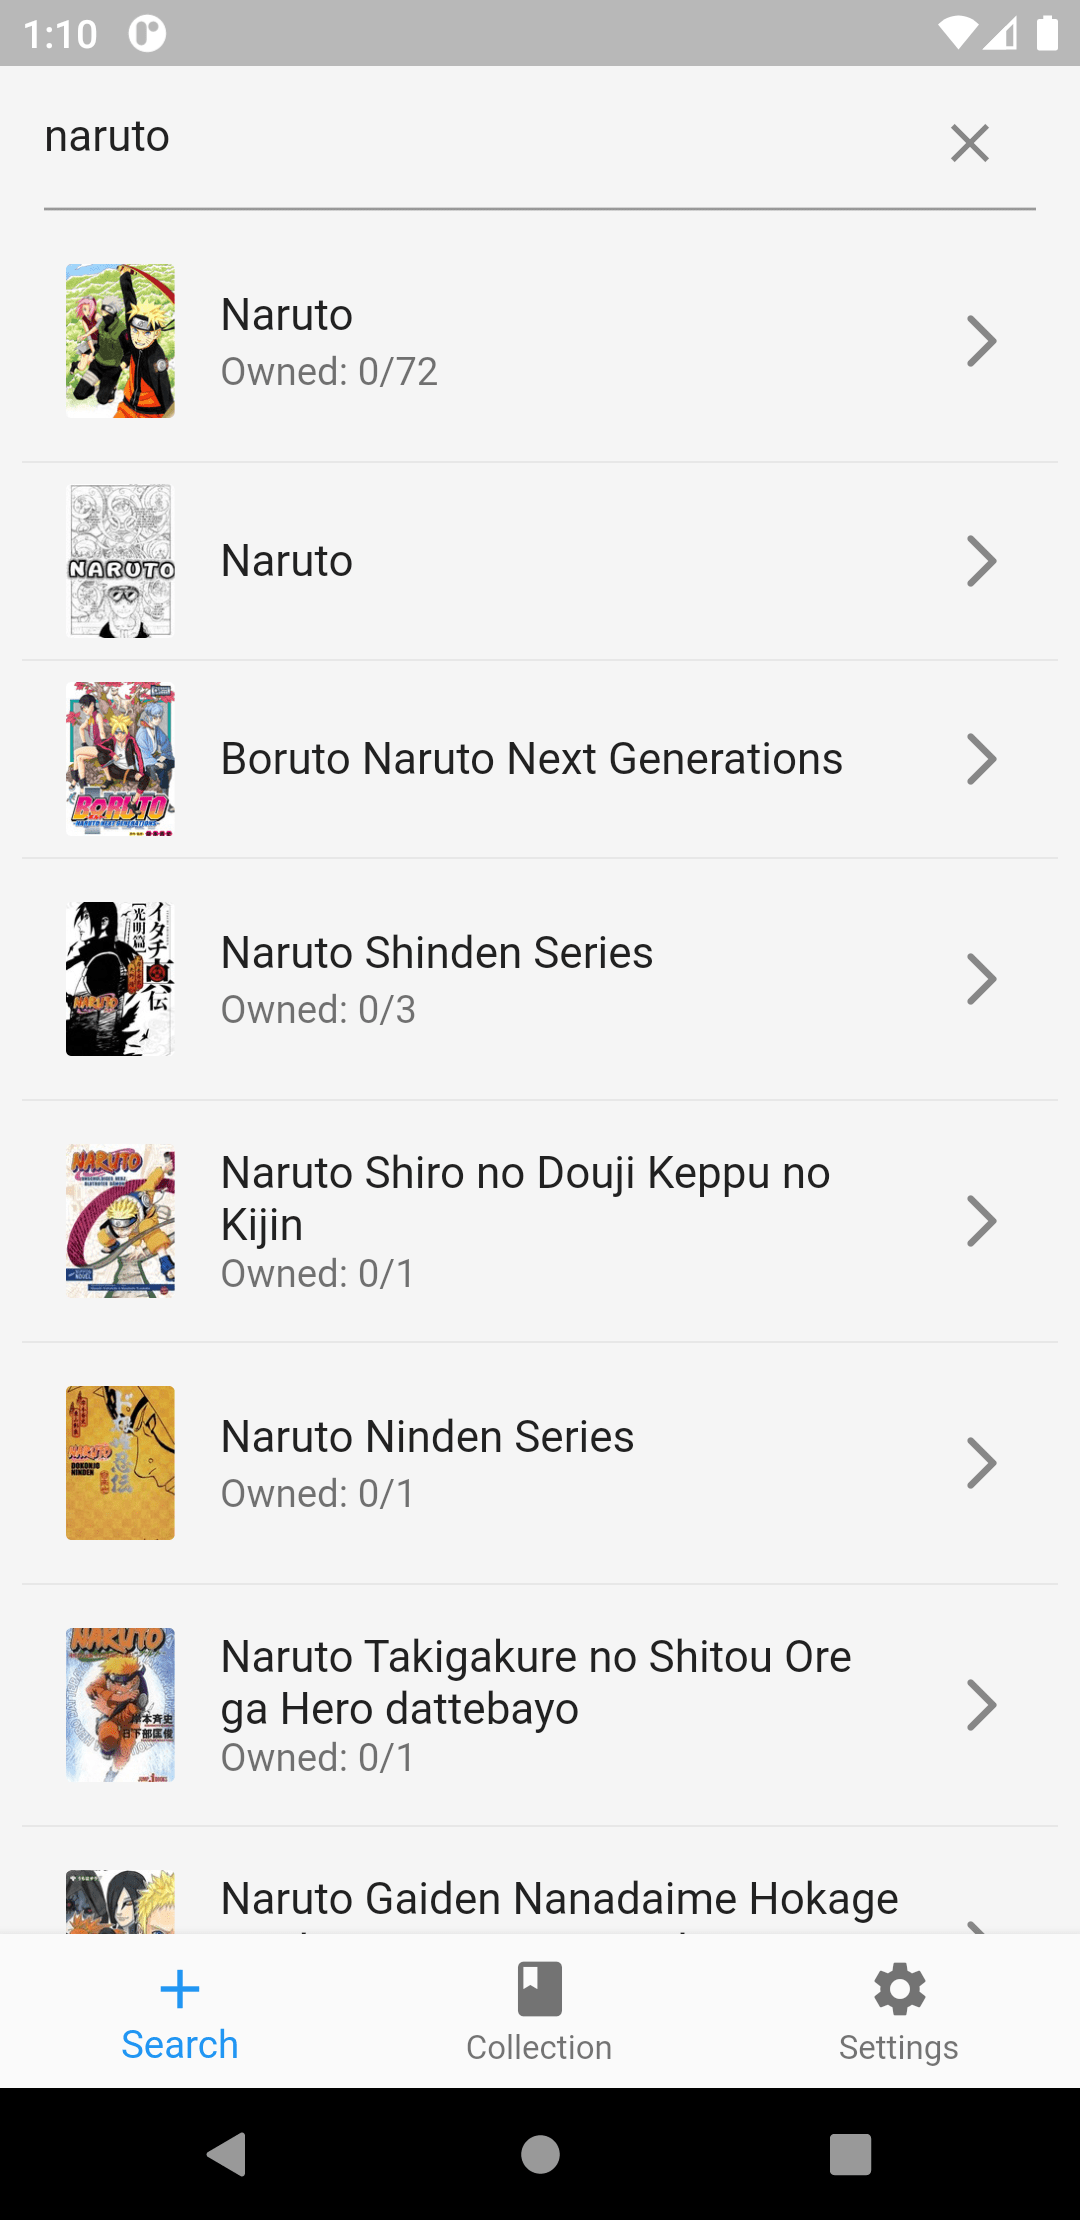 Follow and track your manga collection easily with a simple Flutter application using Kitsu API